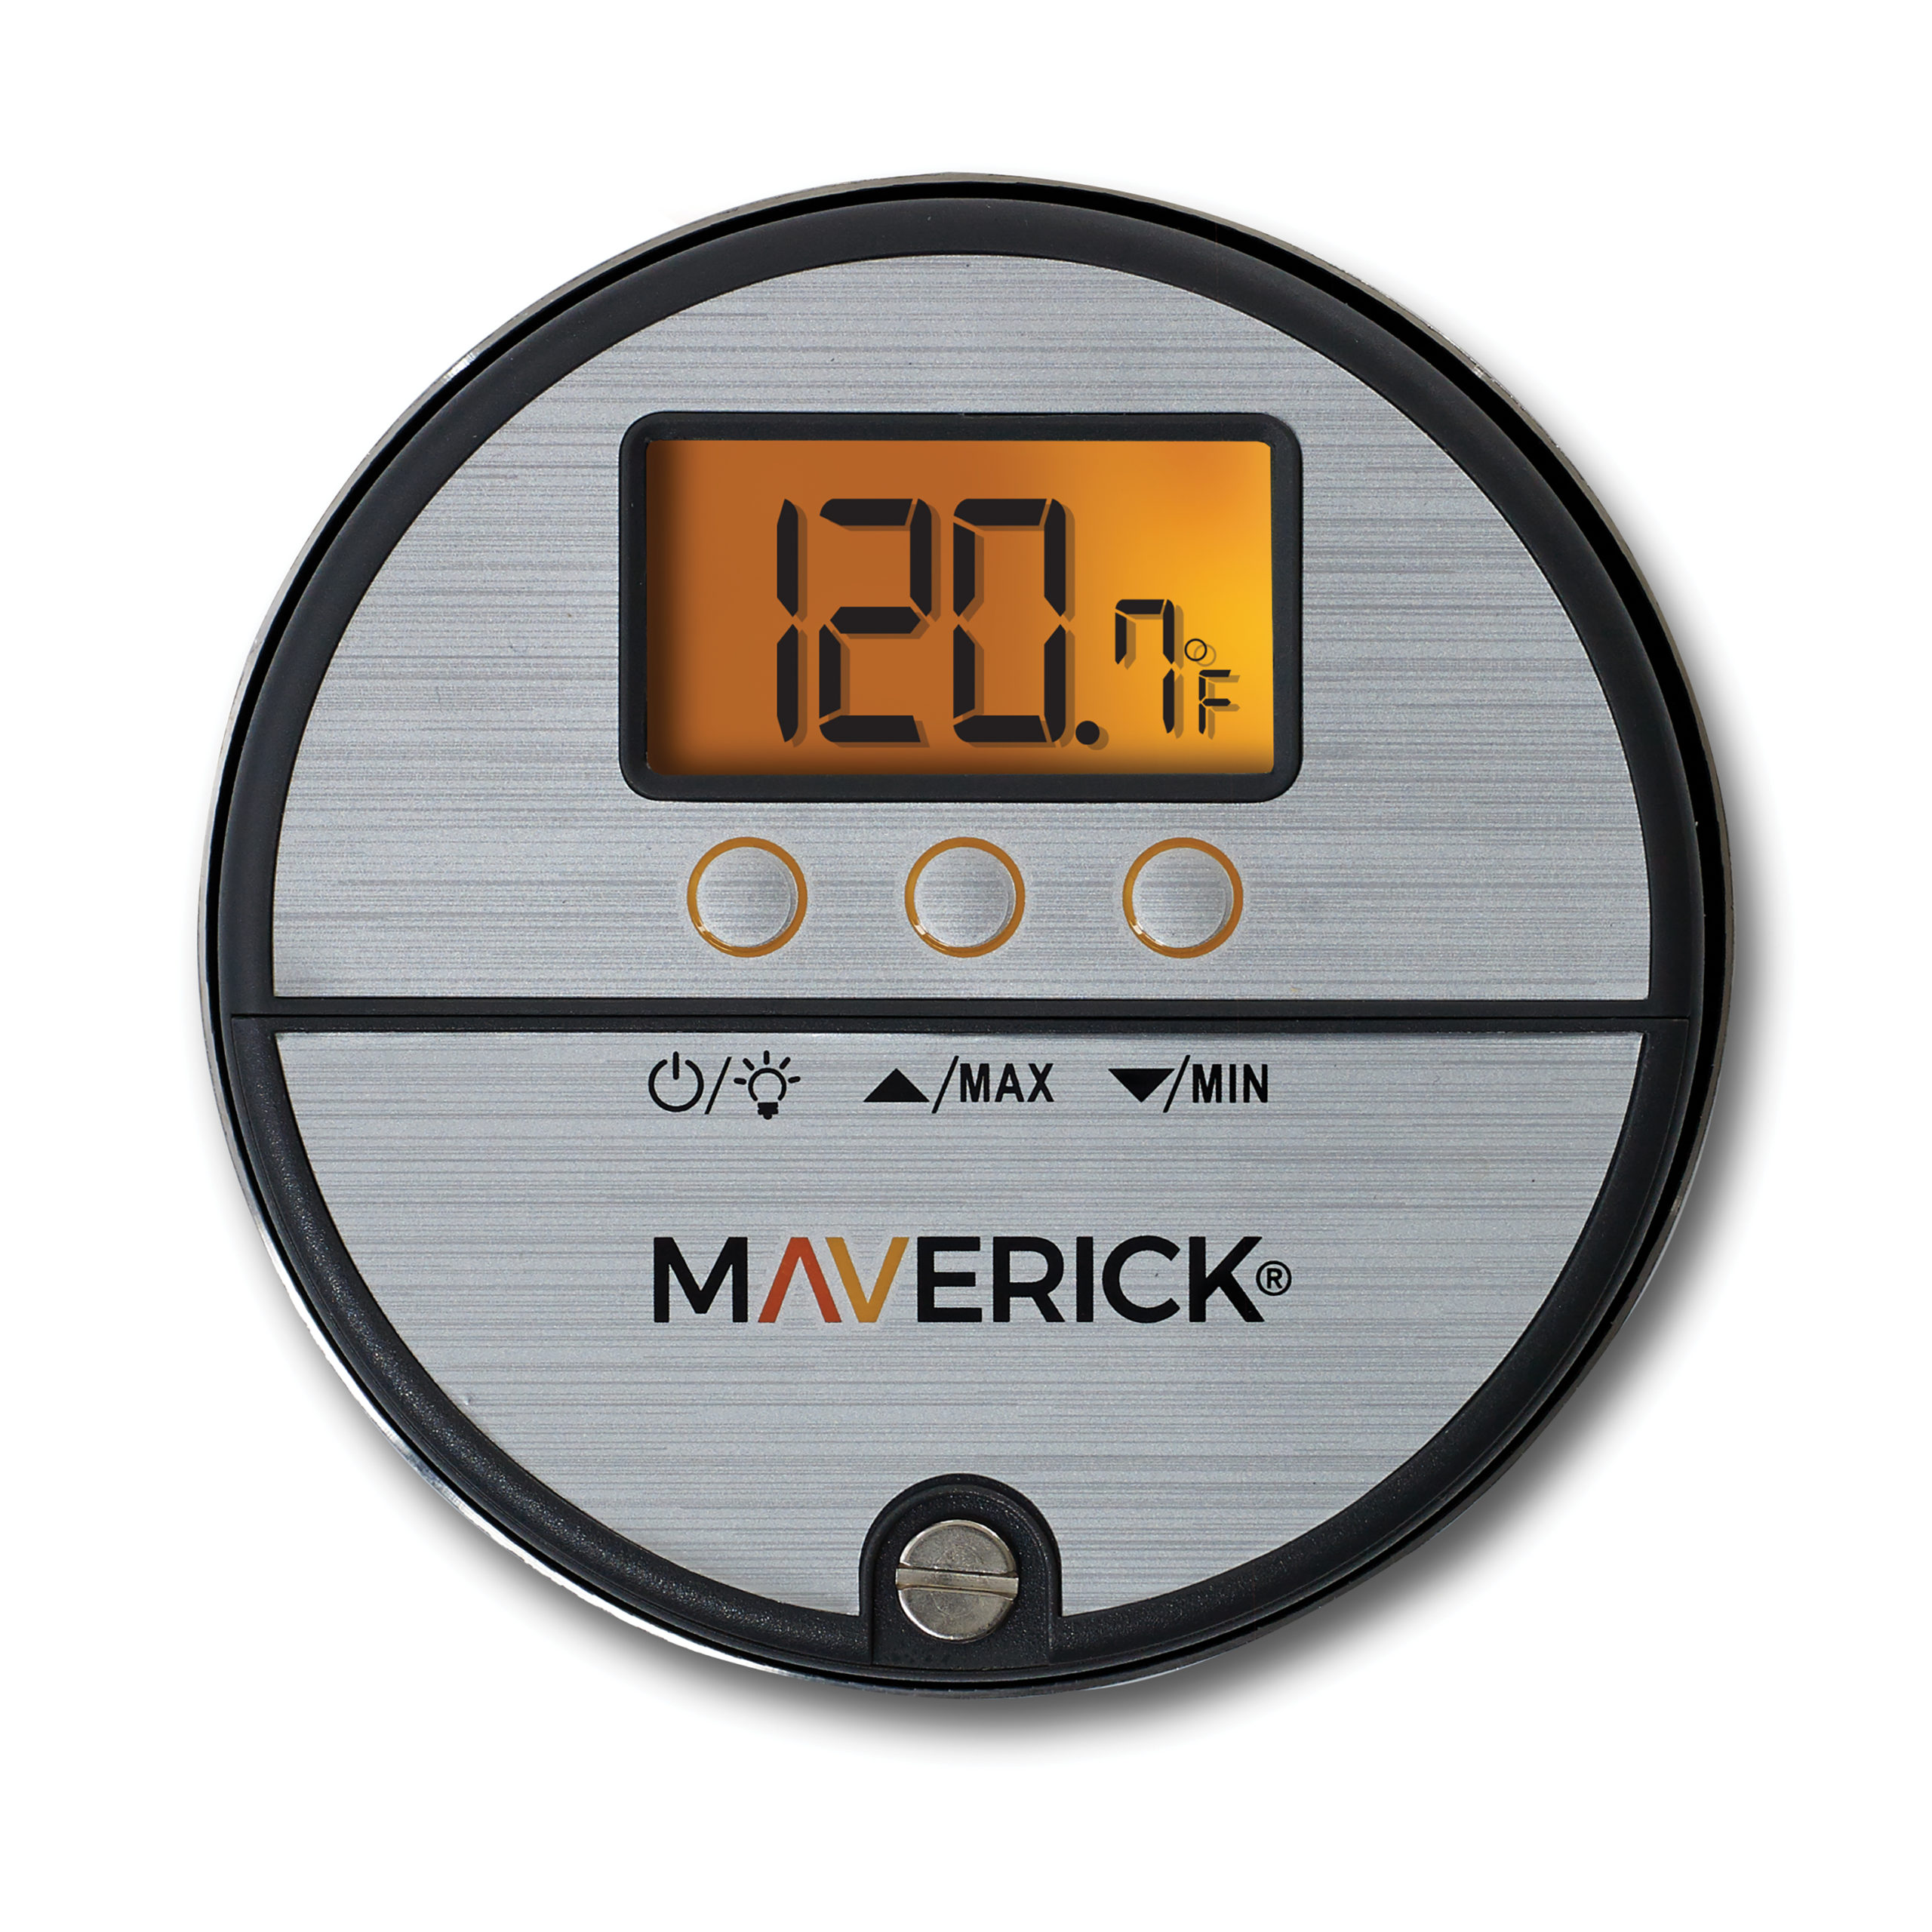 https://www.maverickthermometers.com/wp-content/uploads/2020/09/DGT_310_face-scaled.jpg